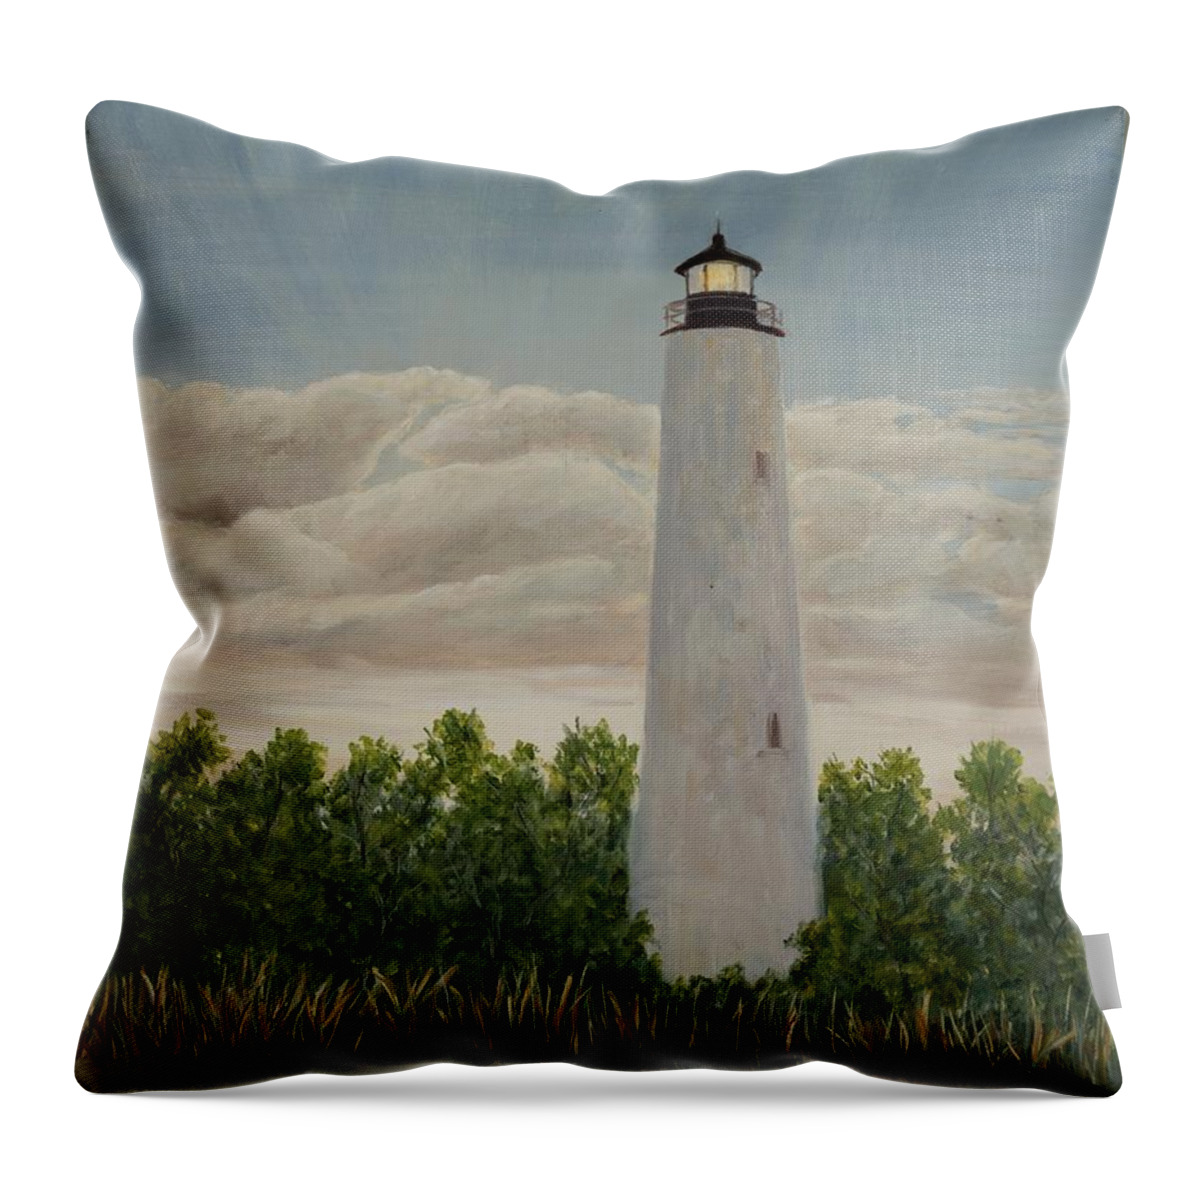 Lighthouse In South Carolina Throw Pillow featuring the painting Georgetown Lighthouse by Audrey McLeod